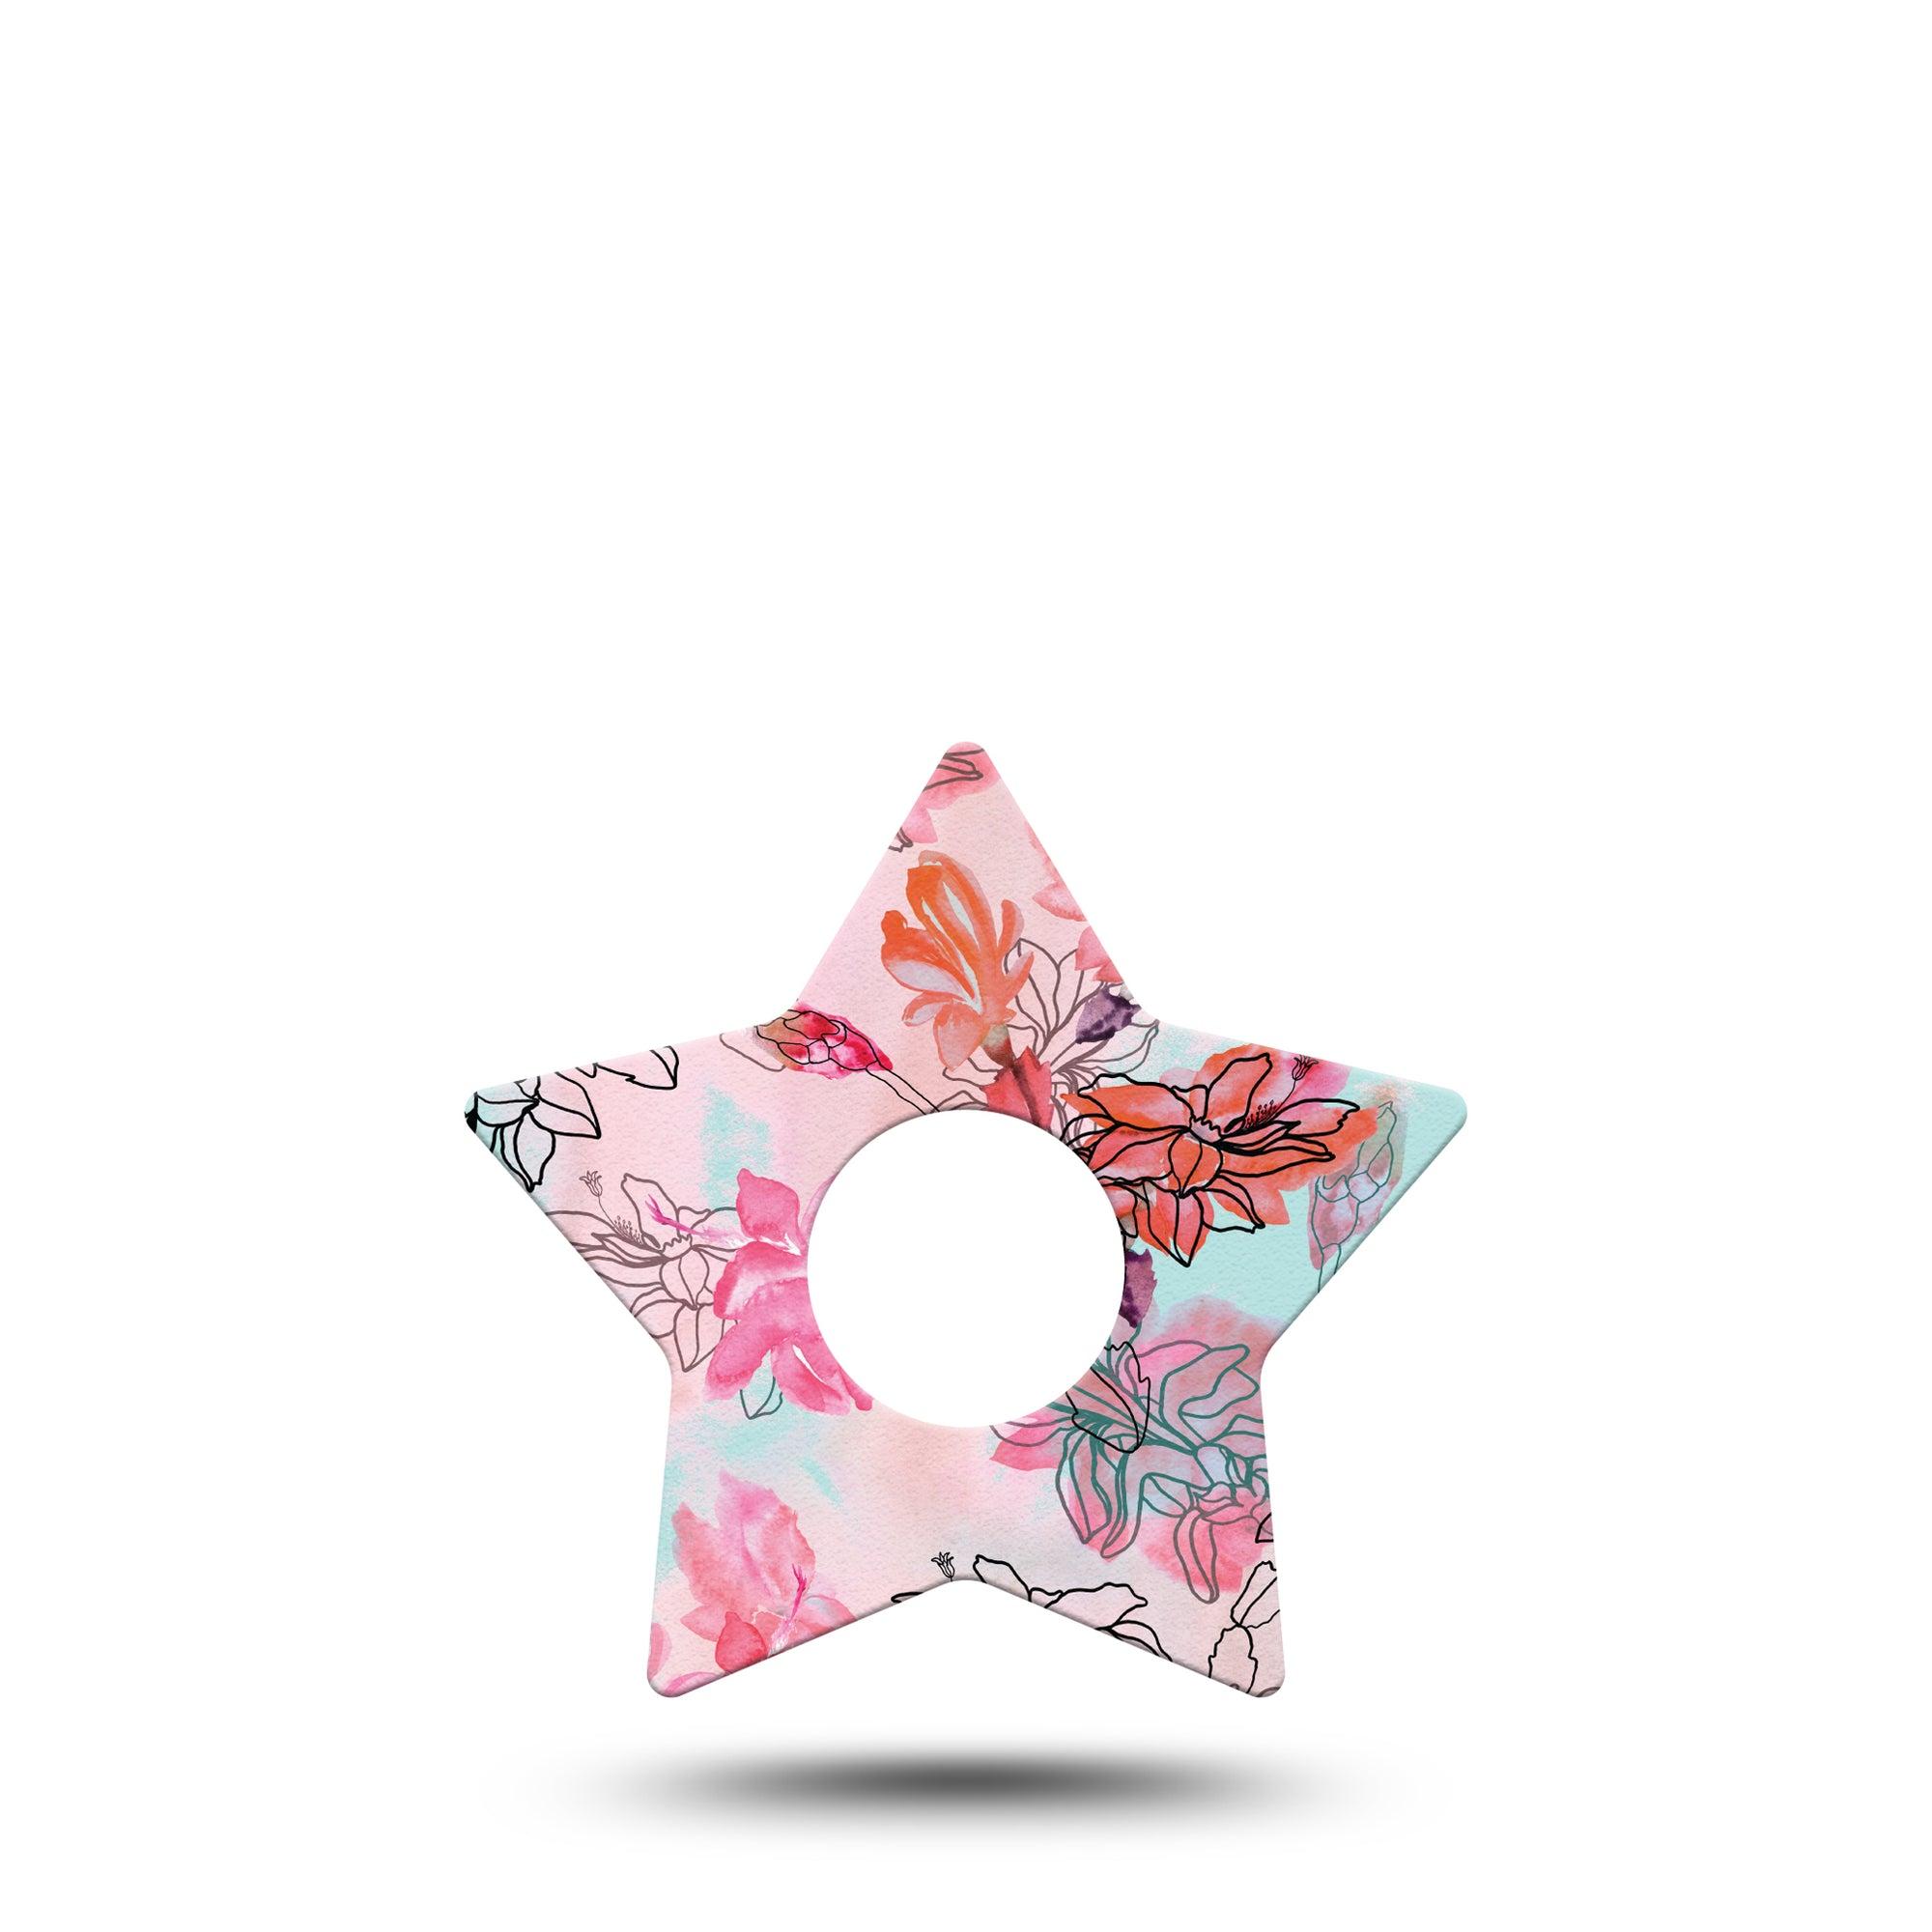 ExpressionMed Whimsical Blossoms Star Libre 3 Tape, Single, Cartooned Florals Themed, CGM Overlay Patch Design